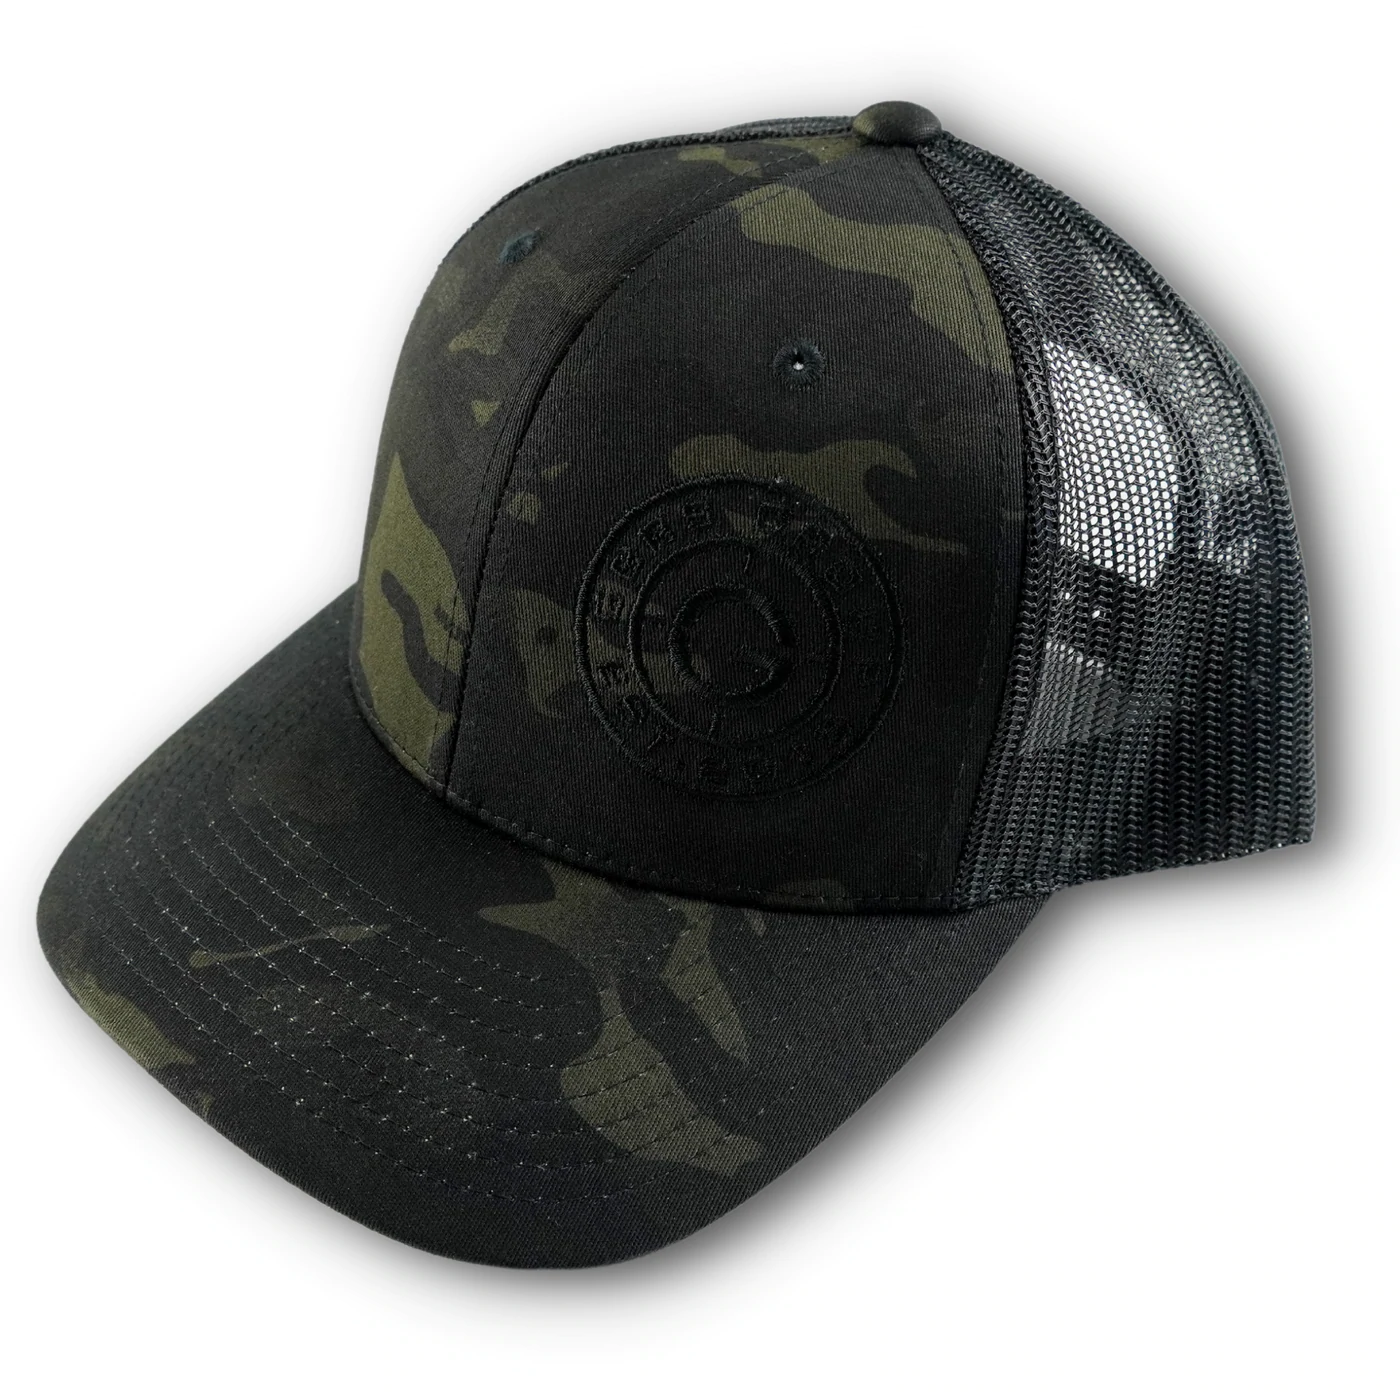 GBRS Group Trucker Hat - Black (Multicam Black with Black Stitching)